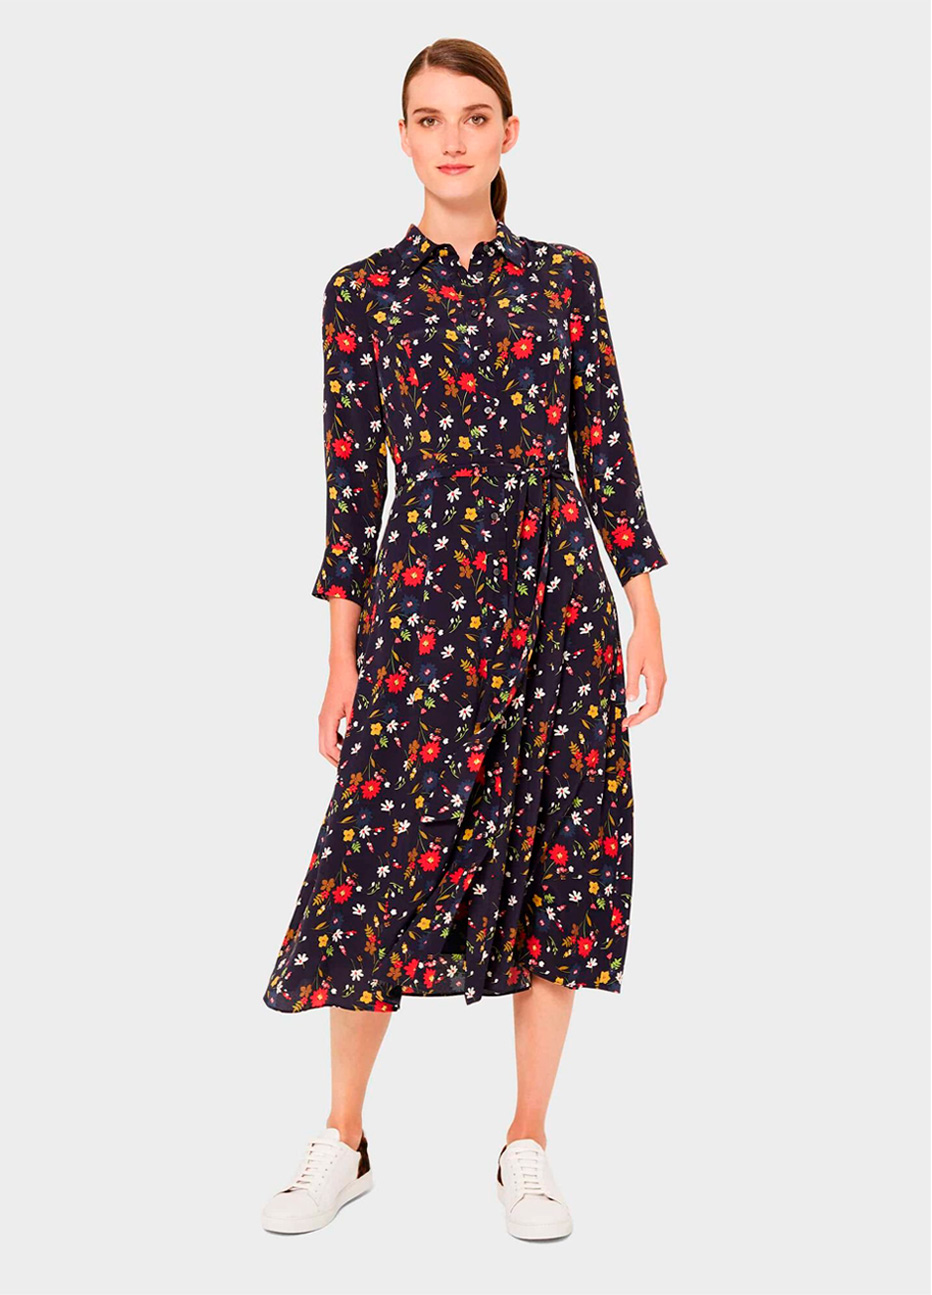 Long sleeve shirt dress with a floral pattern paired with white leather trainers by Hobbs.